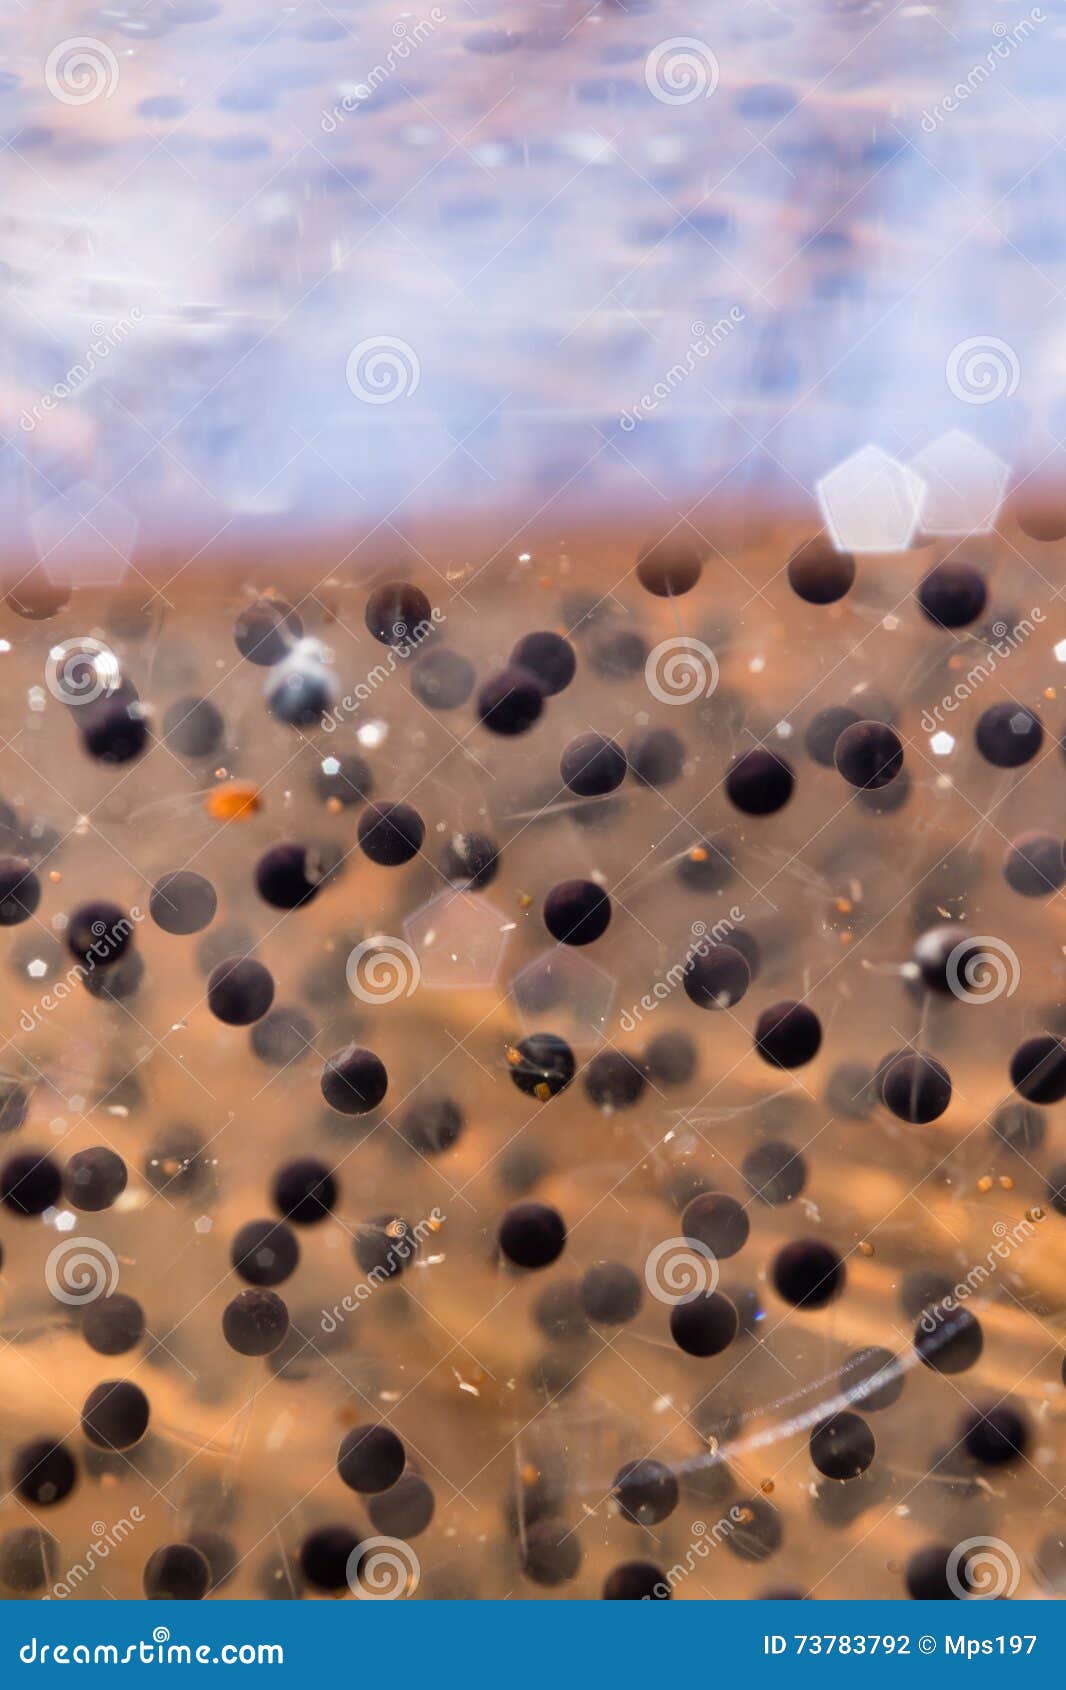 Underwater Shot Of Frog Eggs At A Flood Meadow Stock Image 